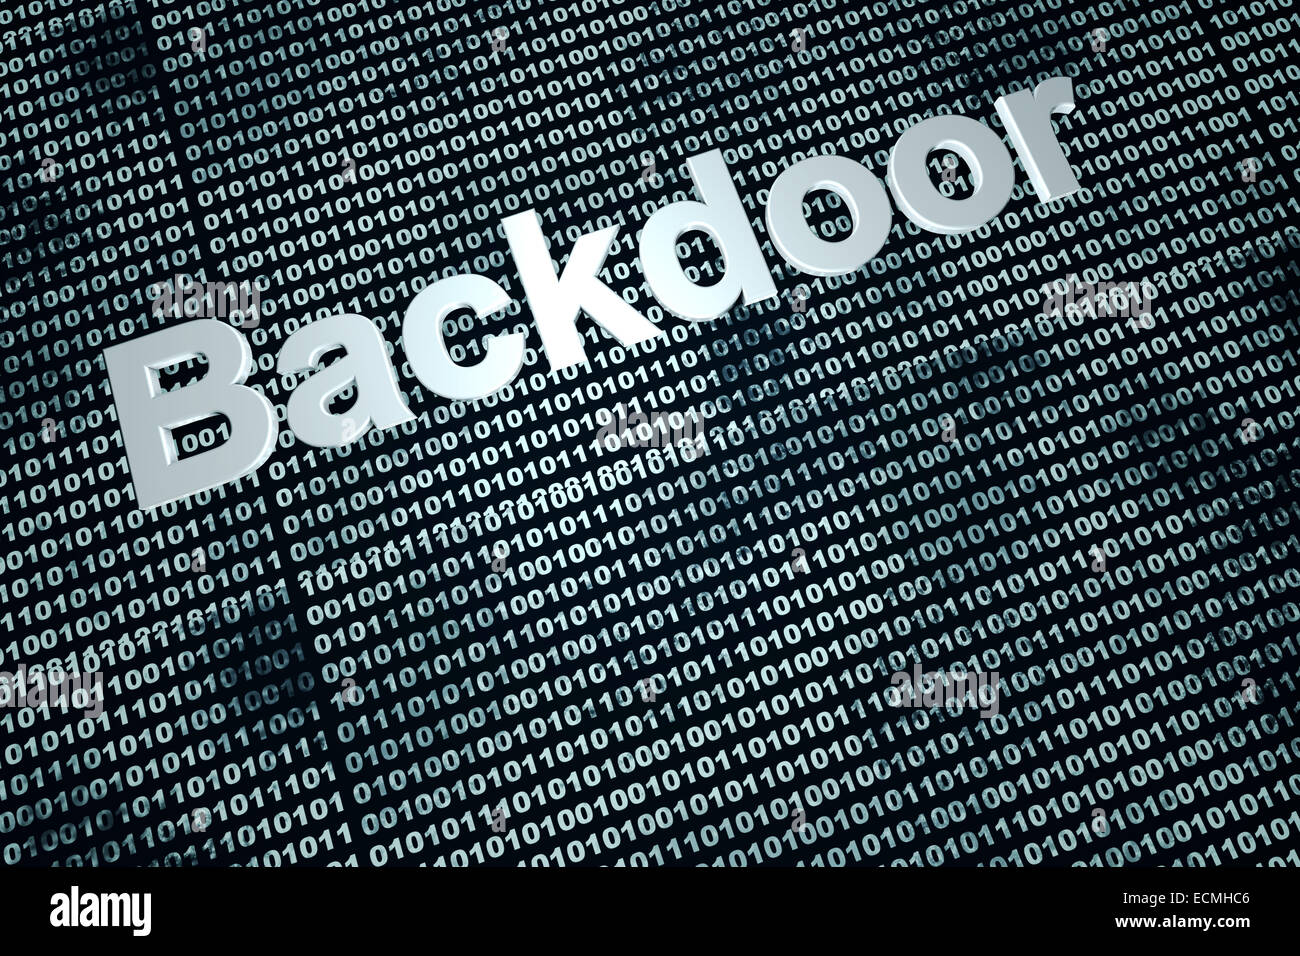 A digital backdoor, a vulnerable port for a hackers attack. 3D rendered Illustration. Stock Photo